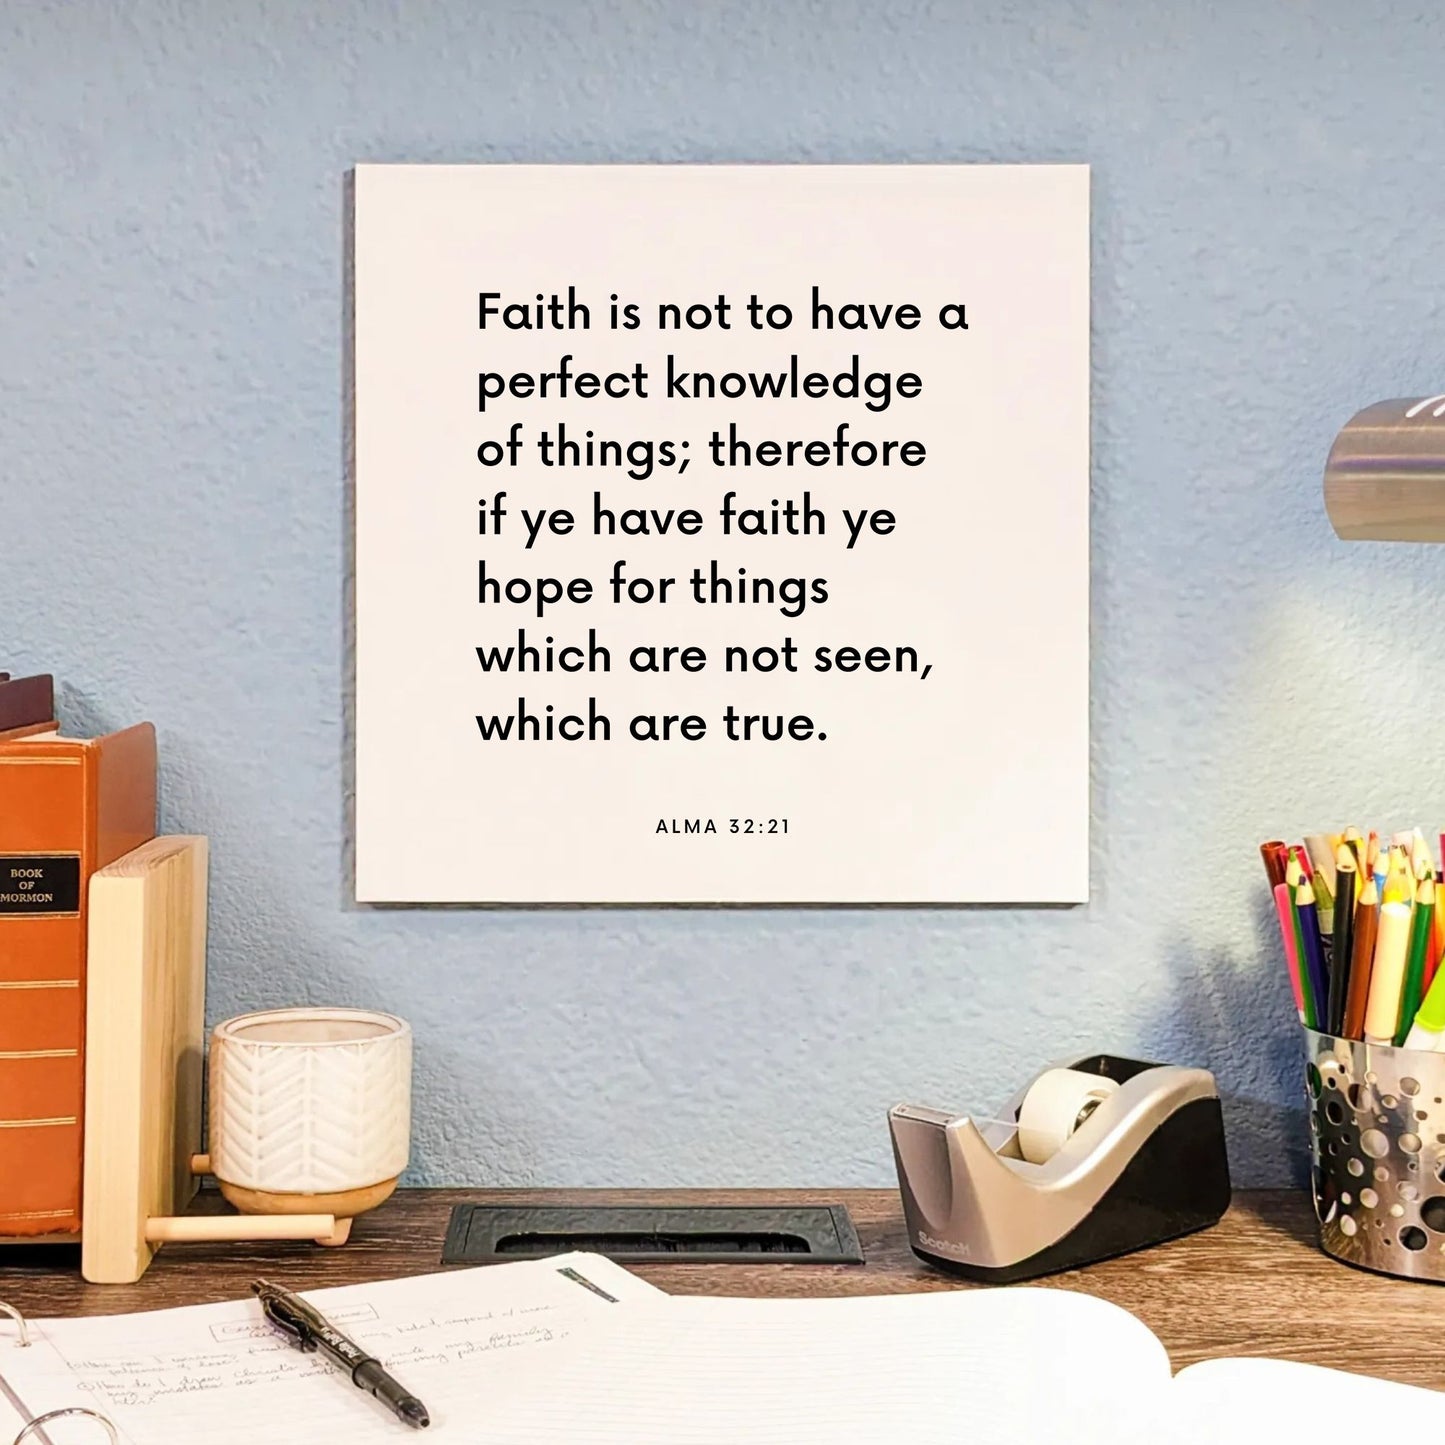 Desk mouting of the scripture tile for Alma 32:21 - "Faith is not to have a perfect knowledge"